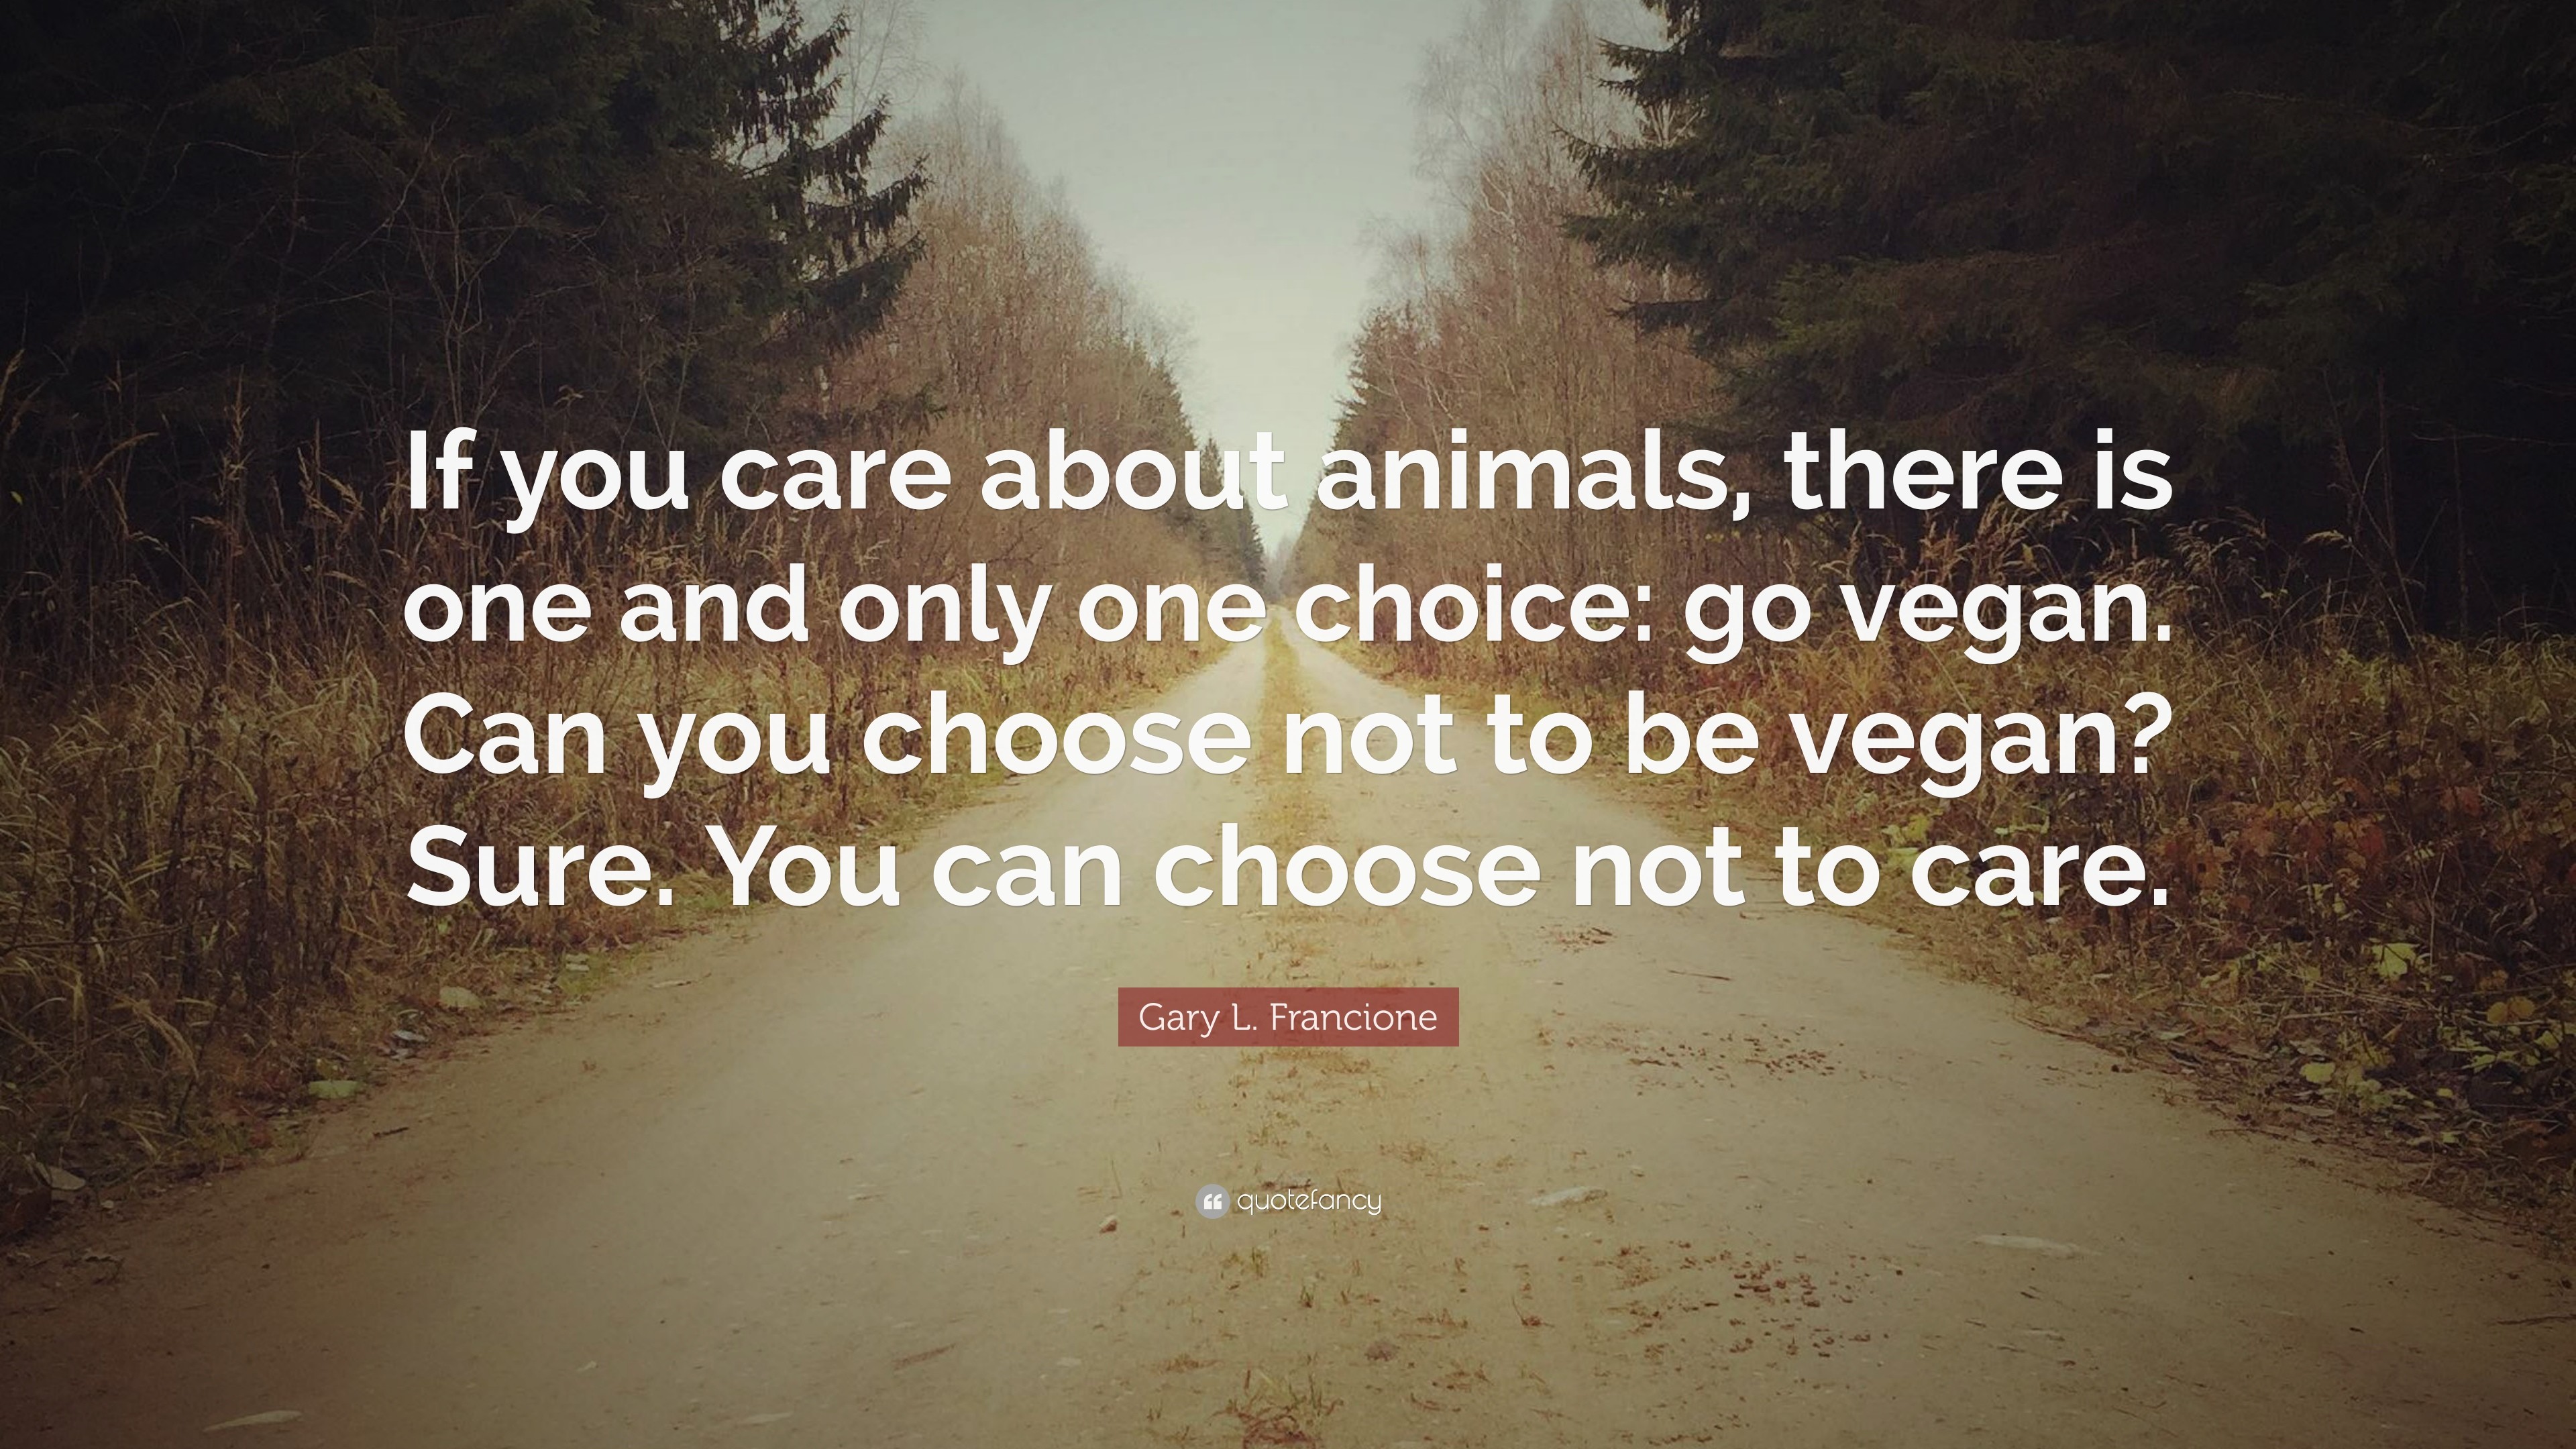 3840x2160 Gary L. Francione Quote: “If you care about animals, there is one